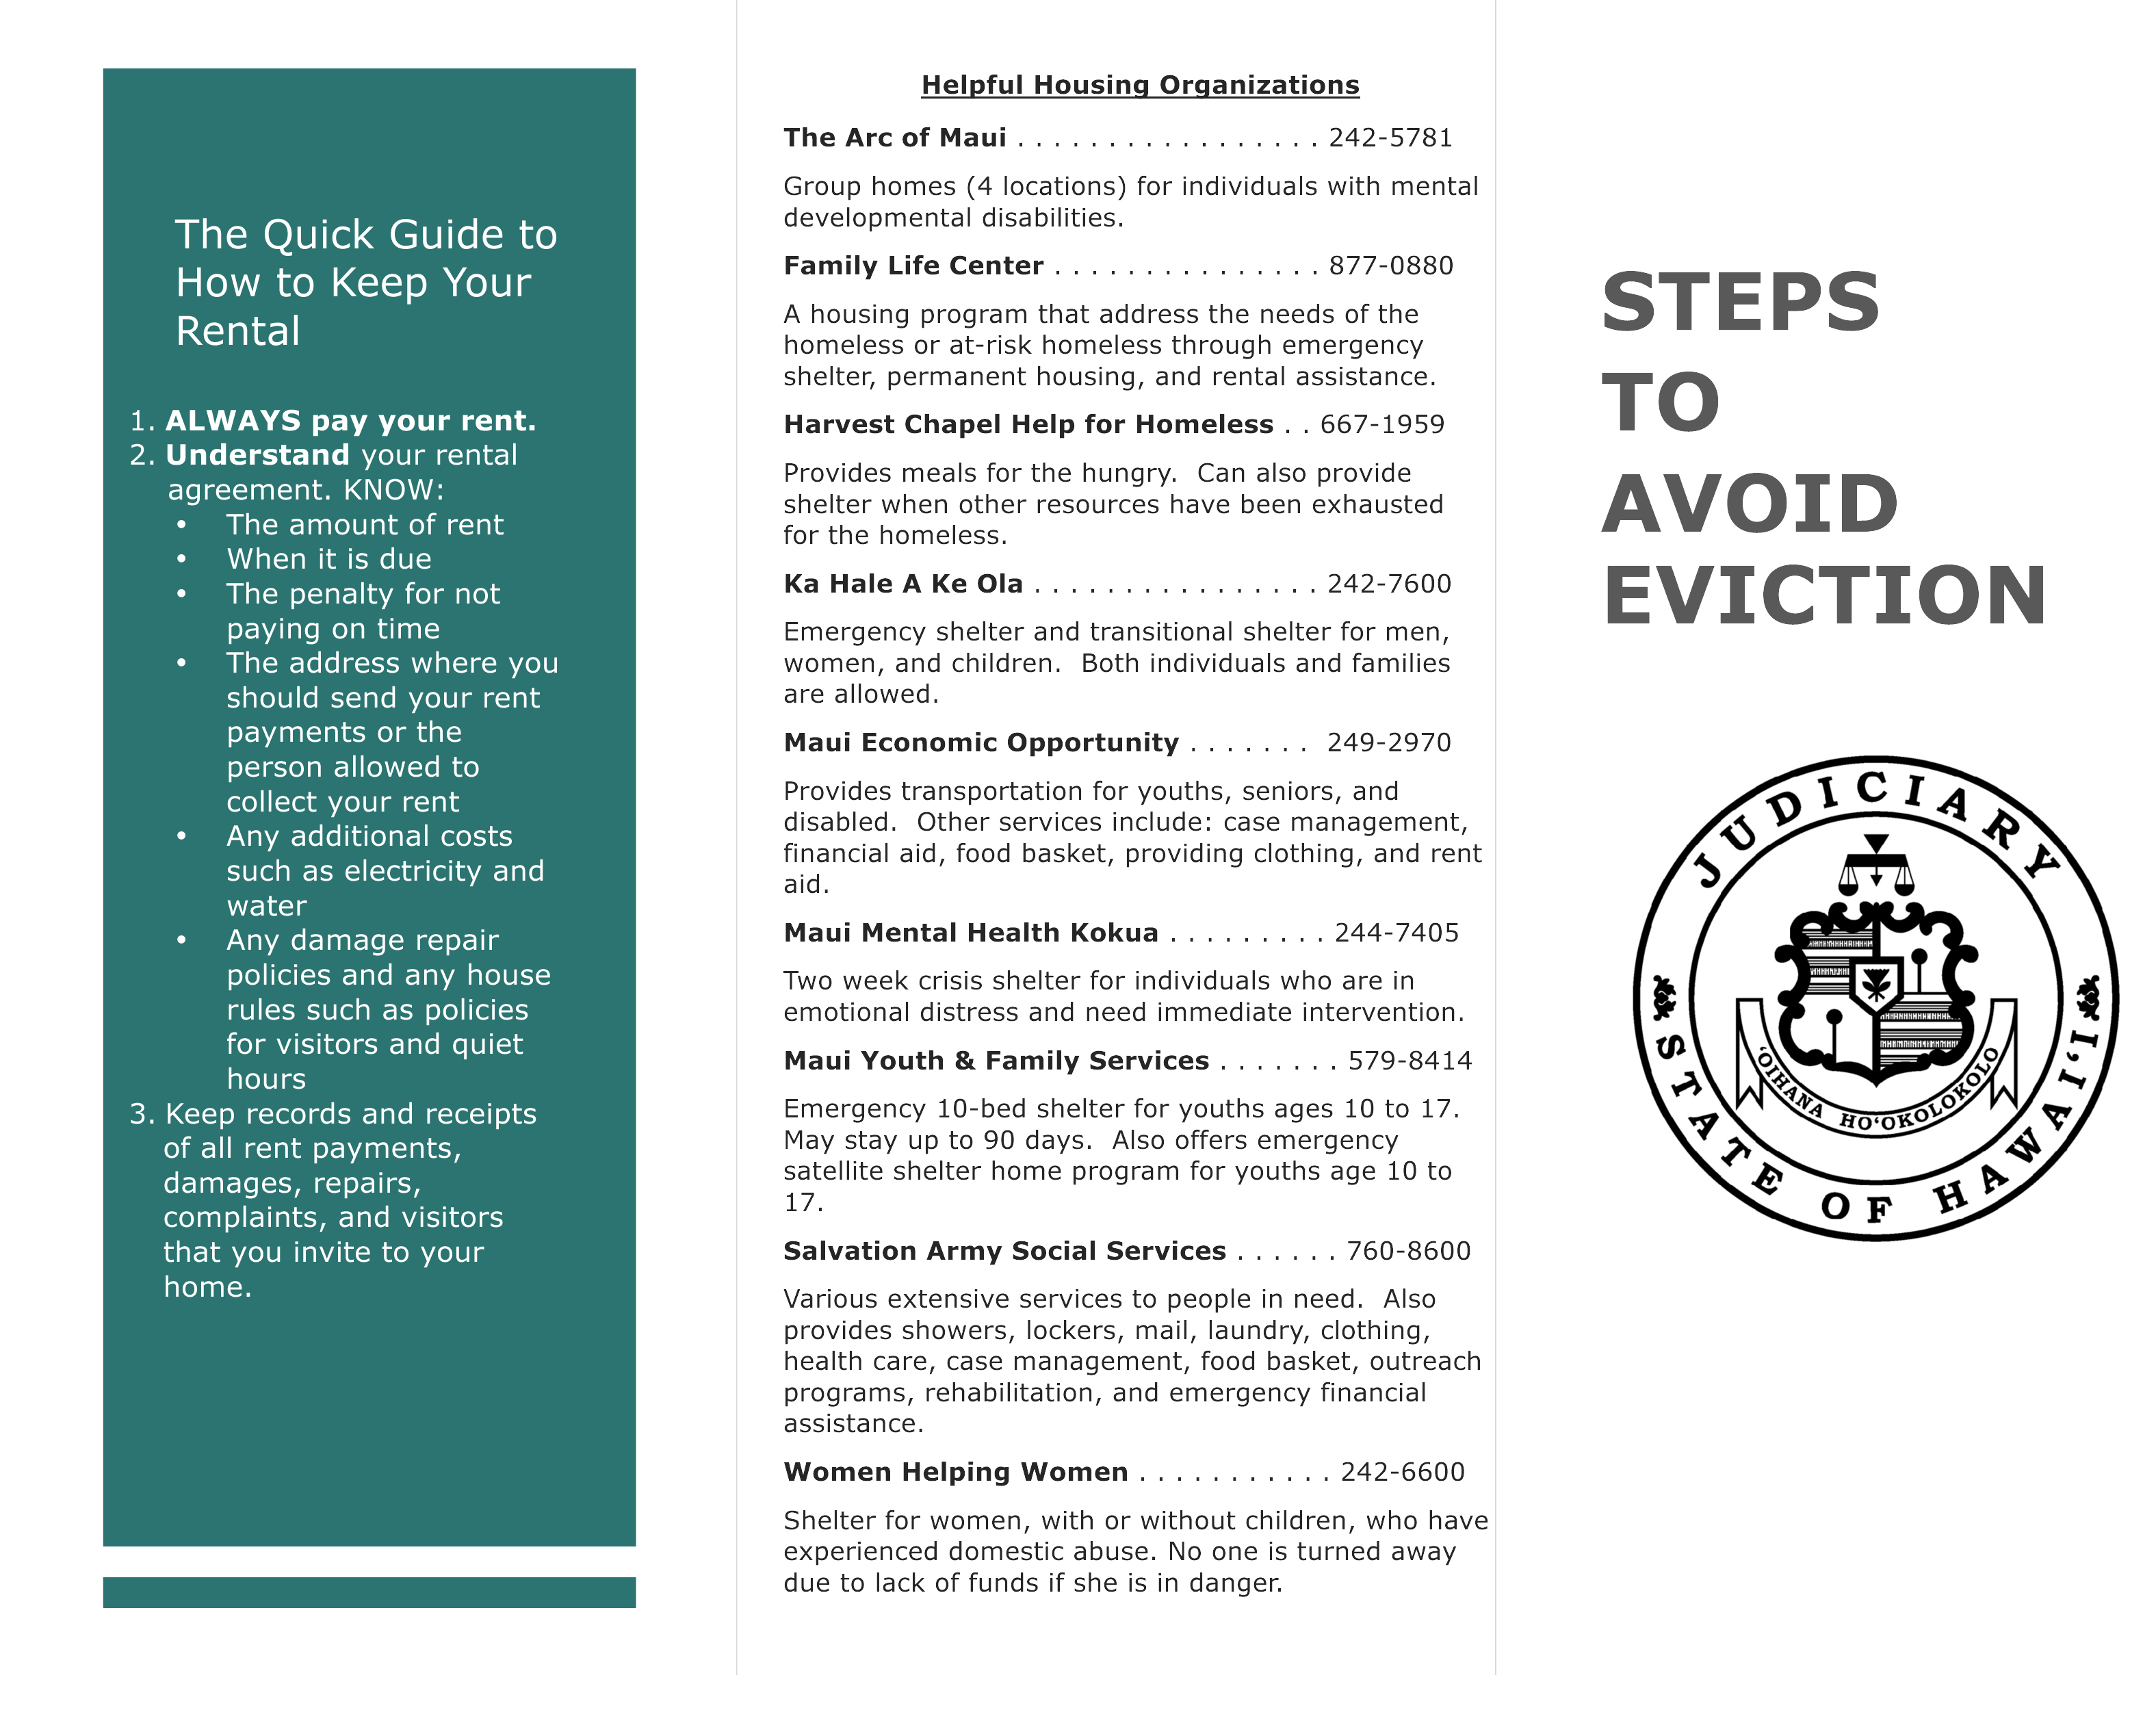 STAE Brochure Page 1. Click image to view in greater detail.